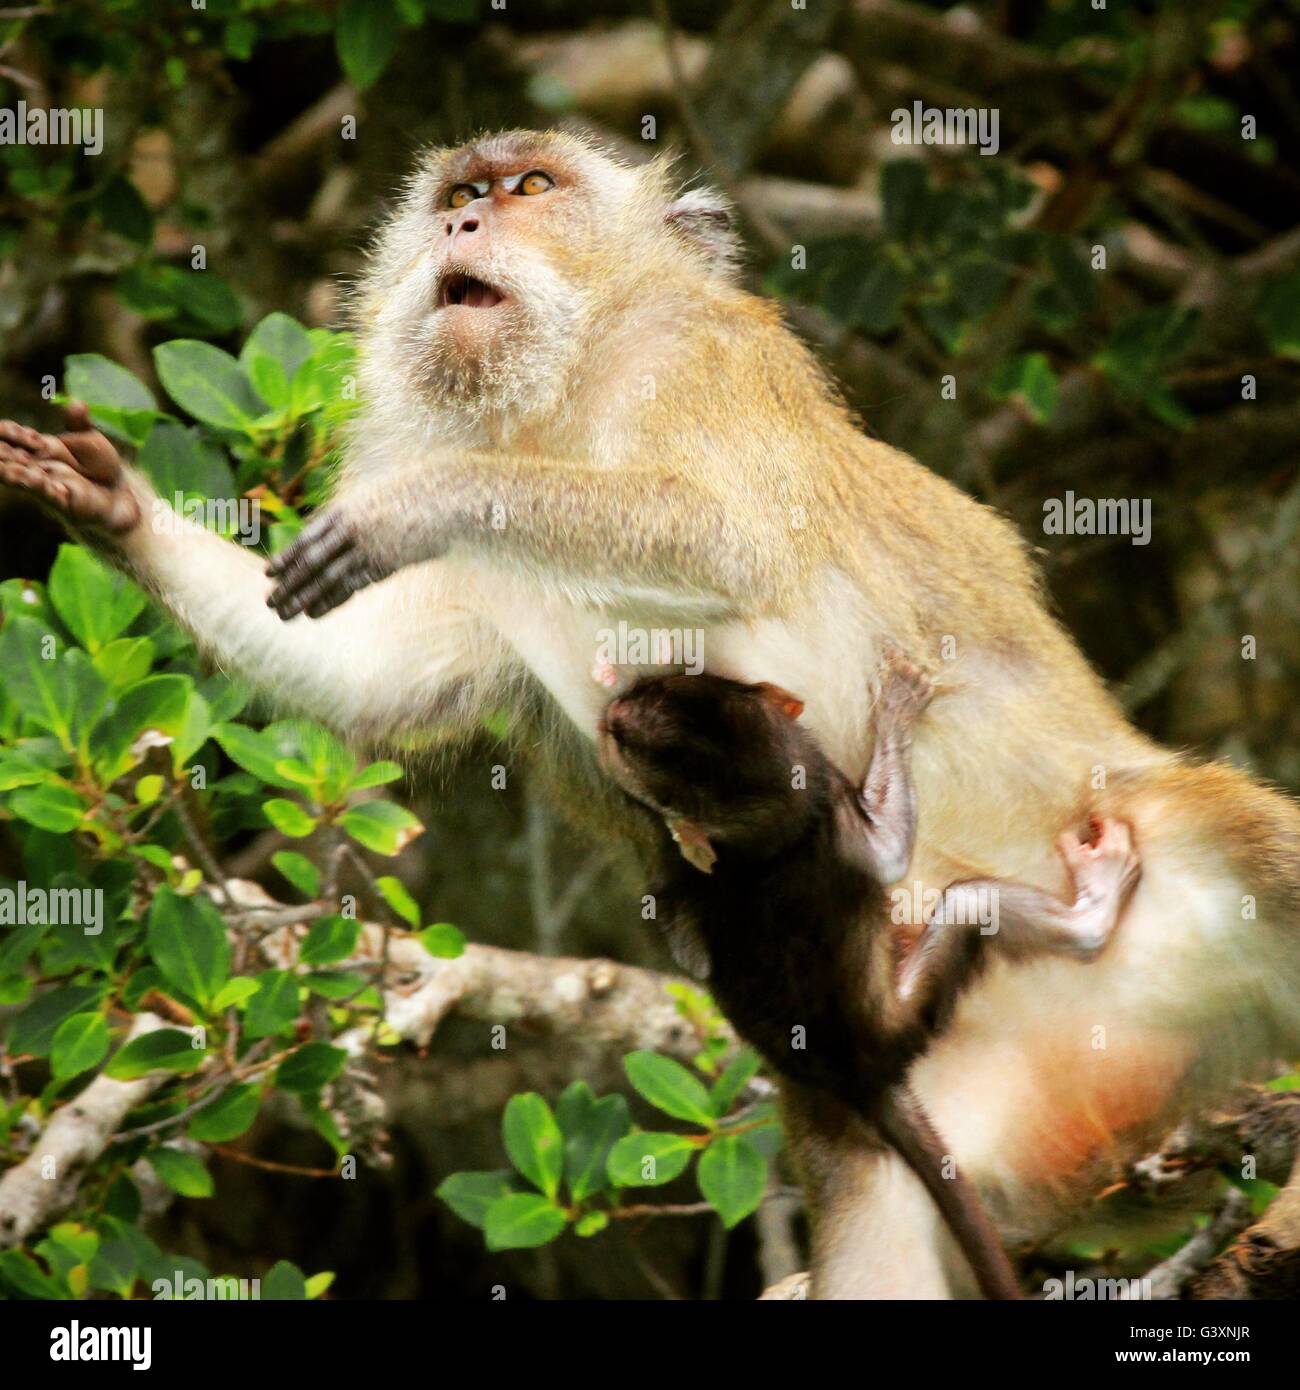 Thai monkey leaping for food with baby attached Stock Photo